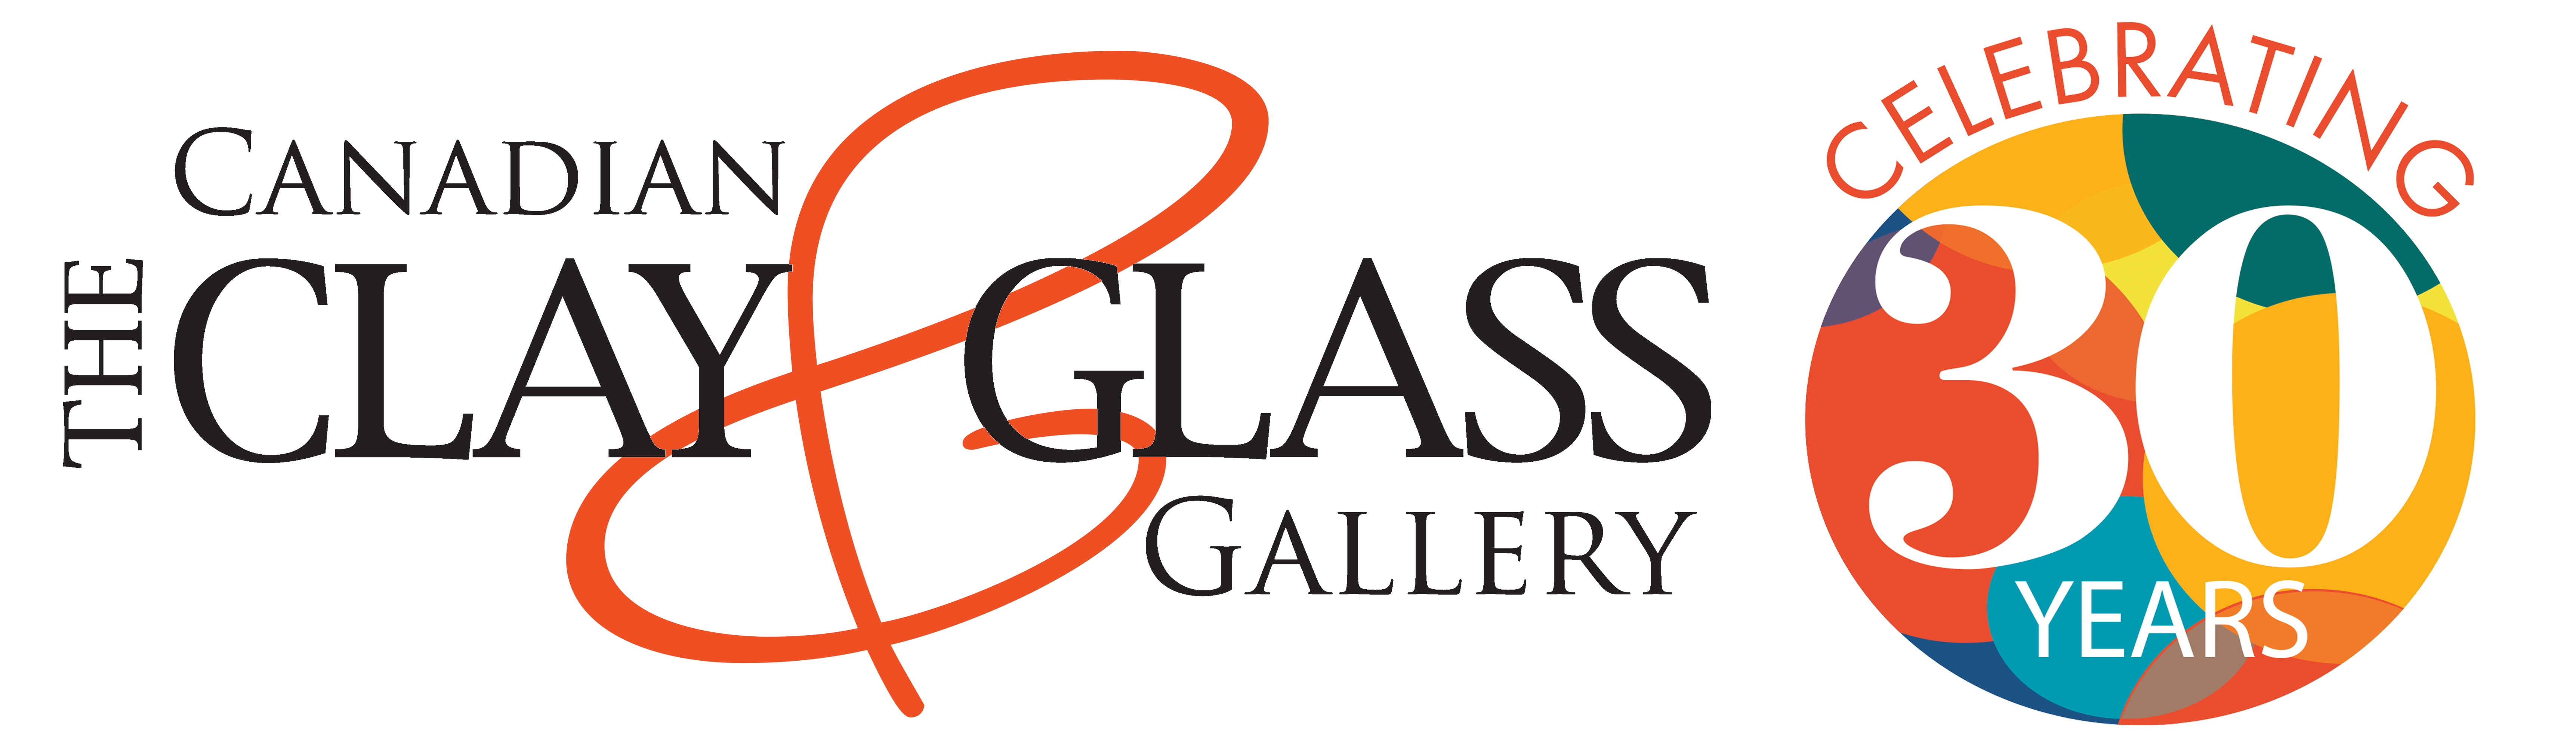 Canadian Clay and Glass Gallery 30th anniversary logo